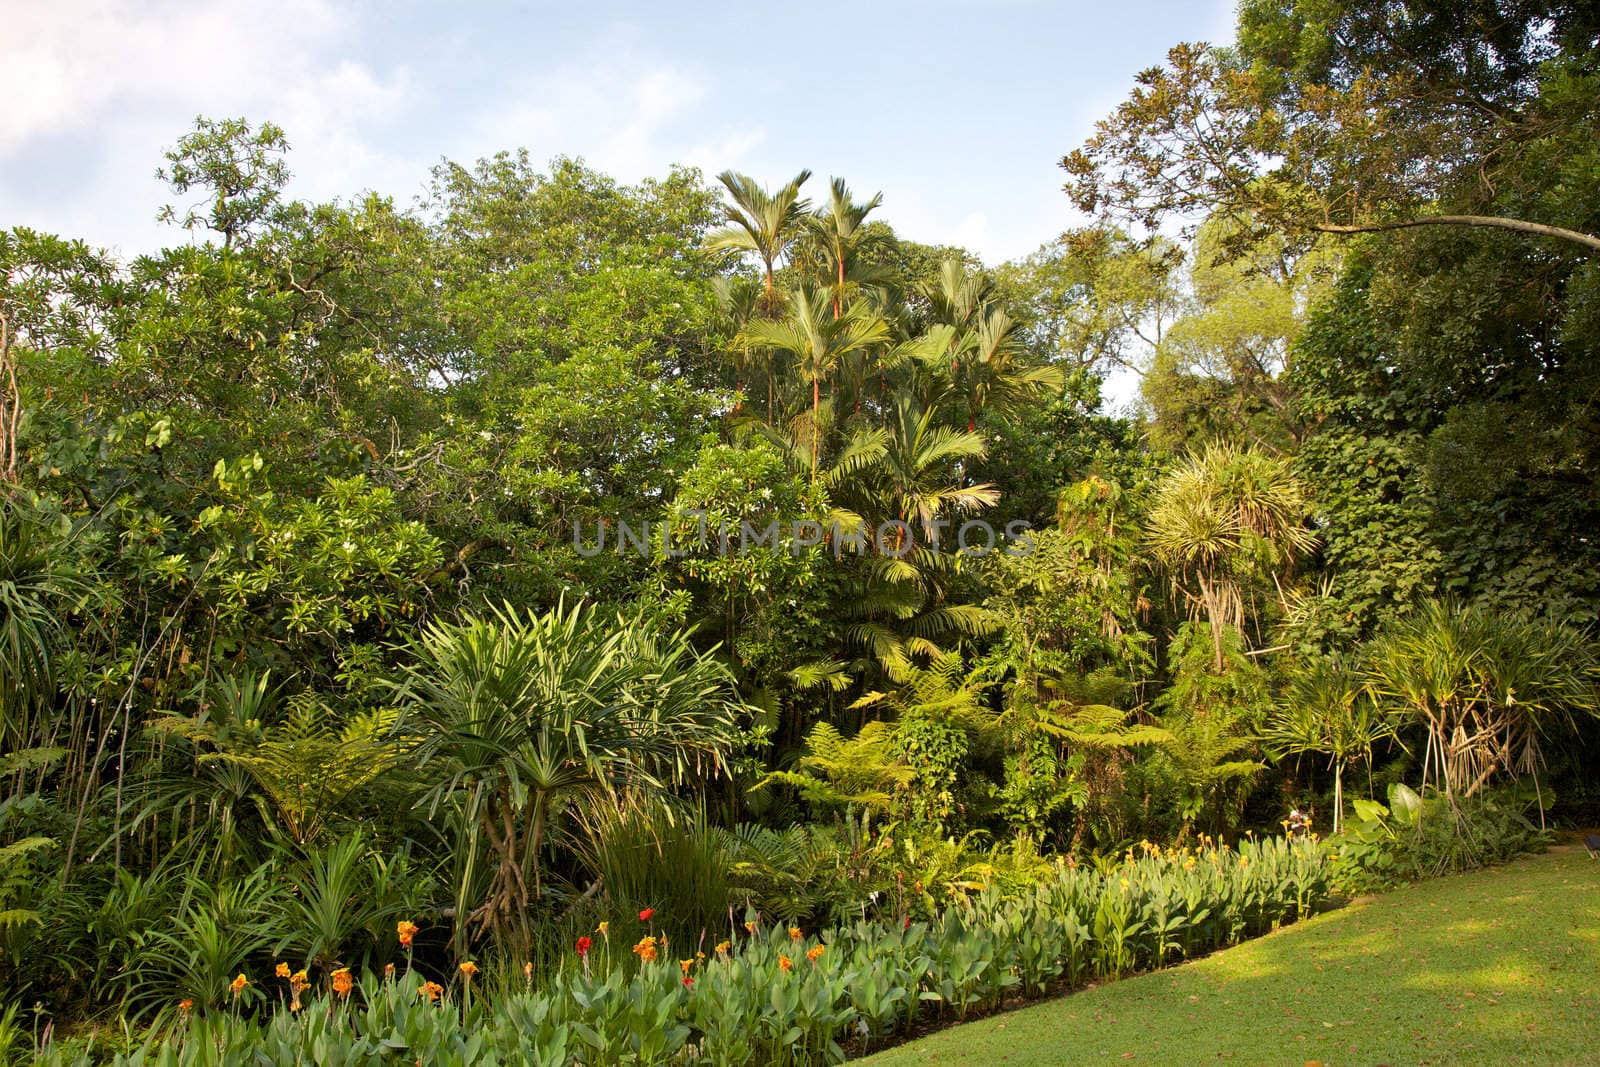 A profusion of tropical plants in the Singapore Botanic Gardens.